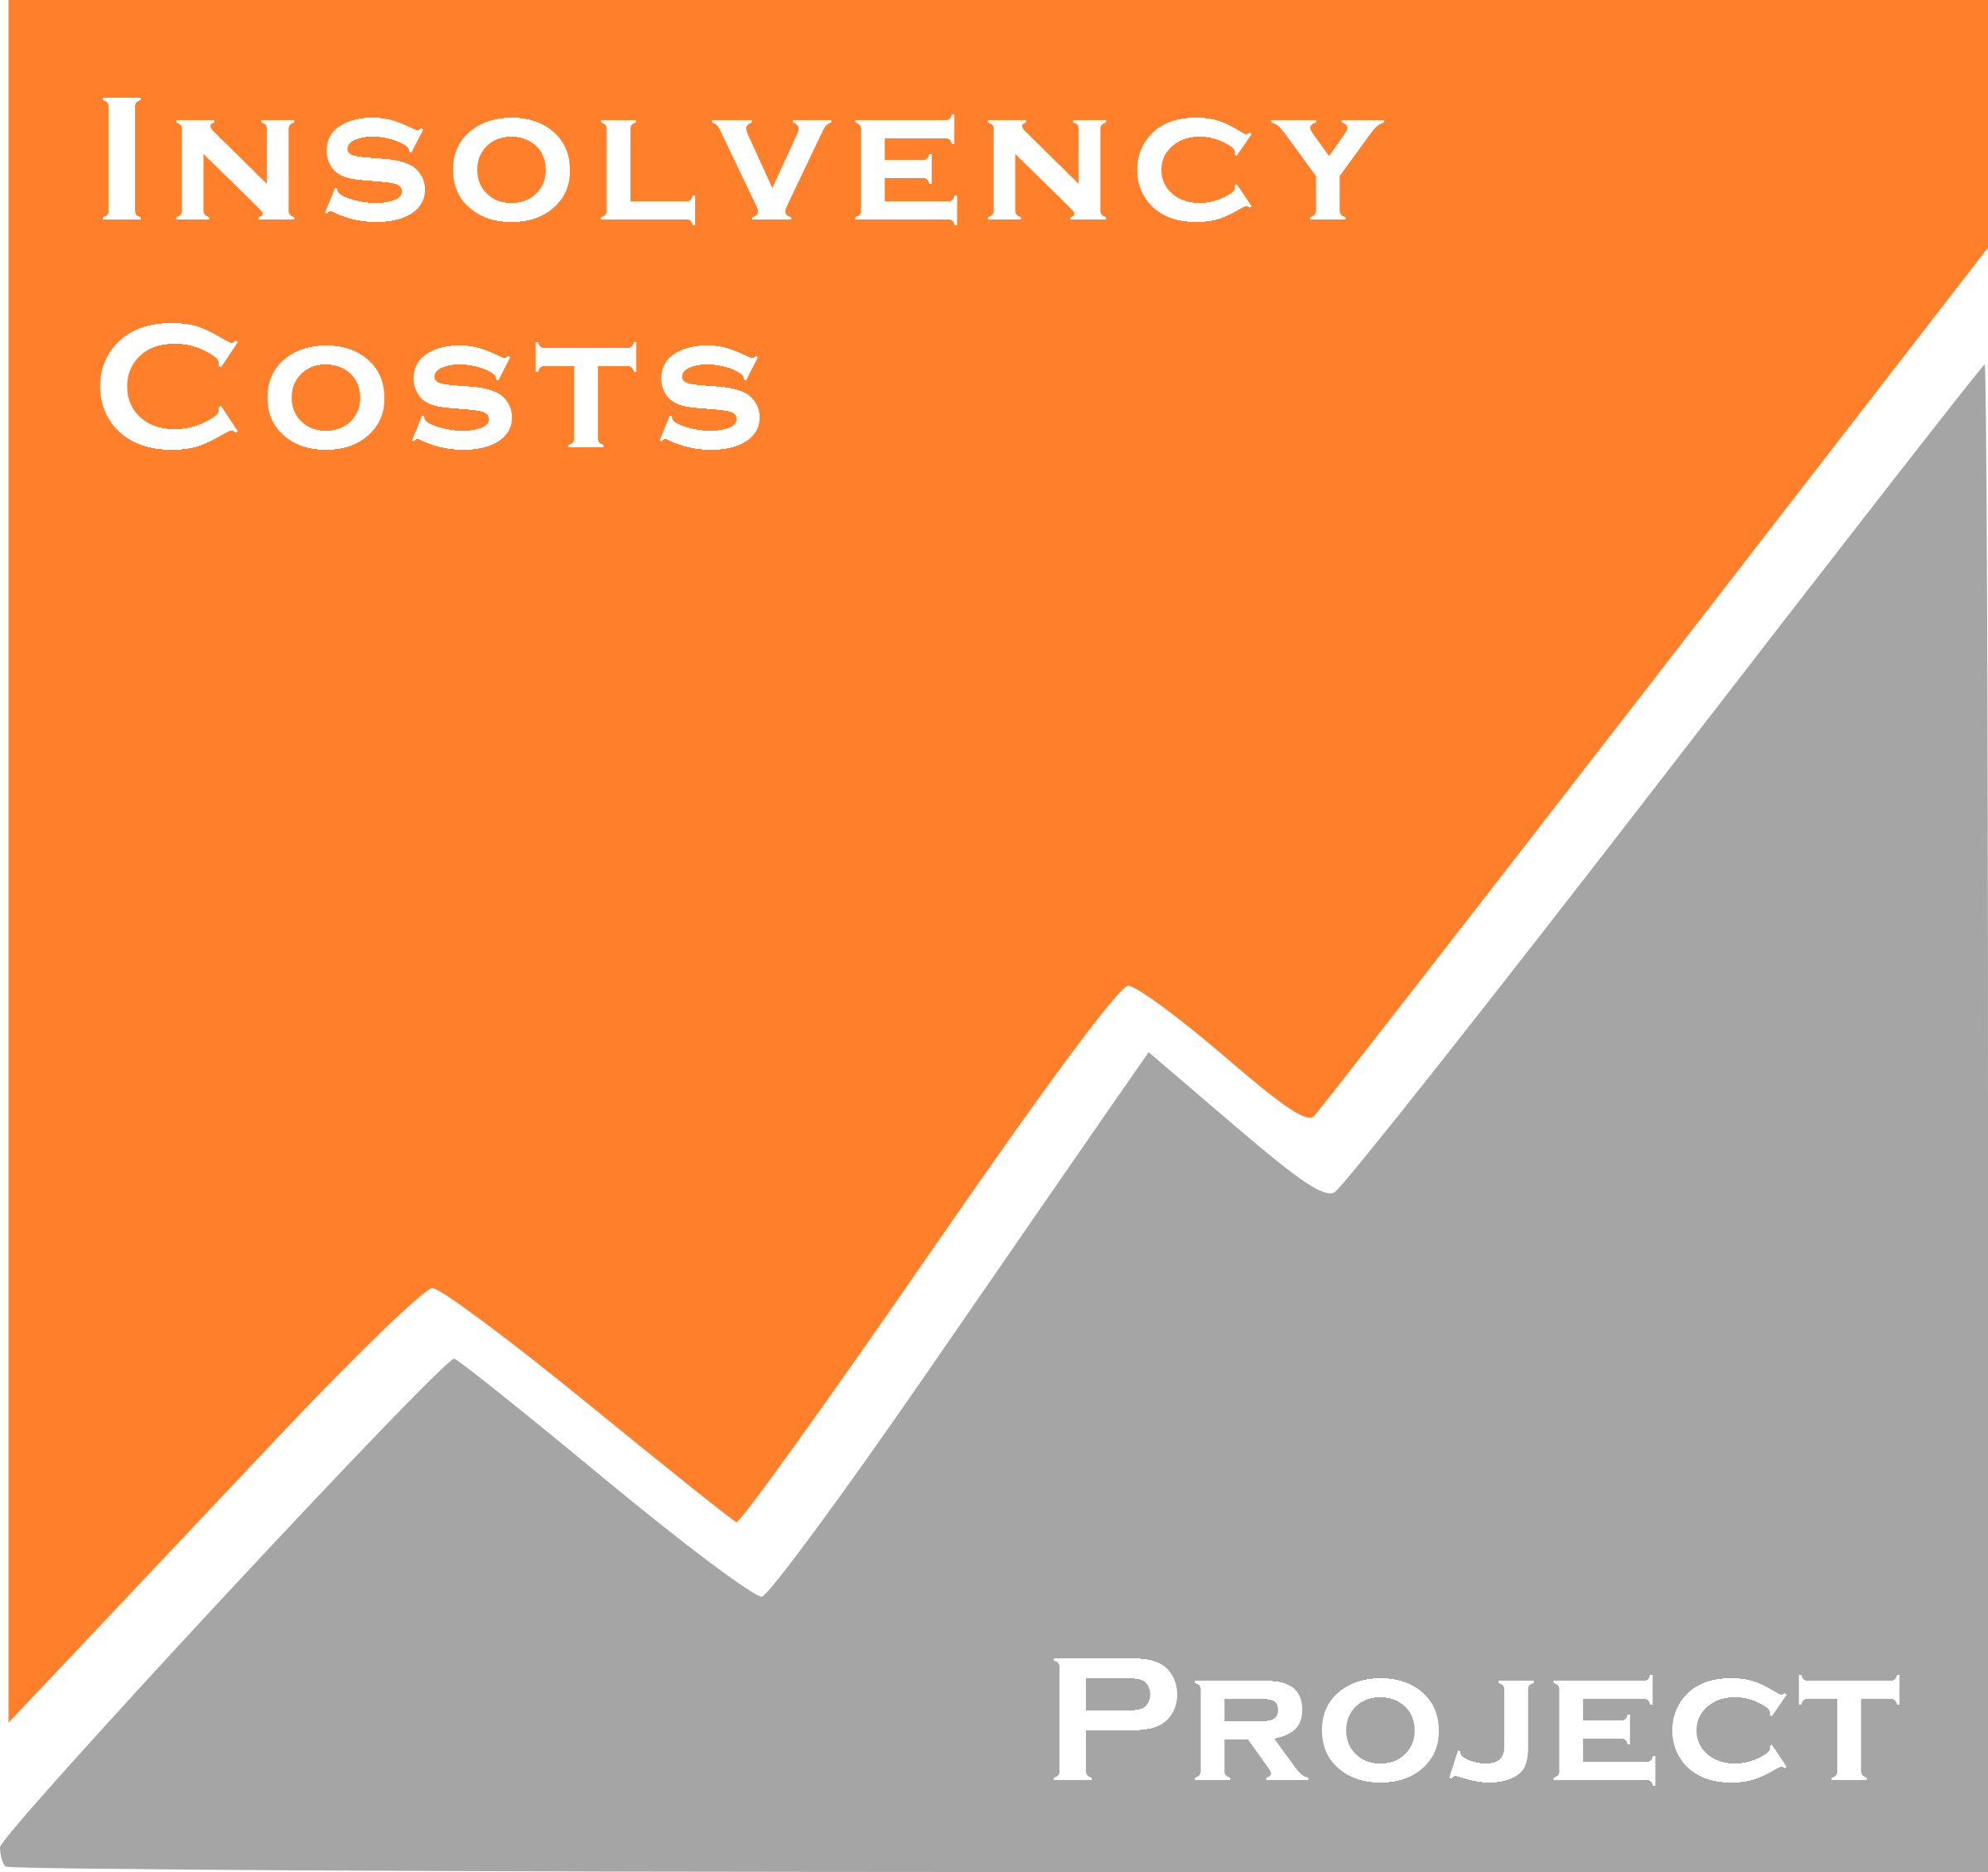 Insolvency-costs-project-logo-3